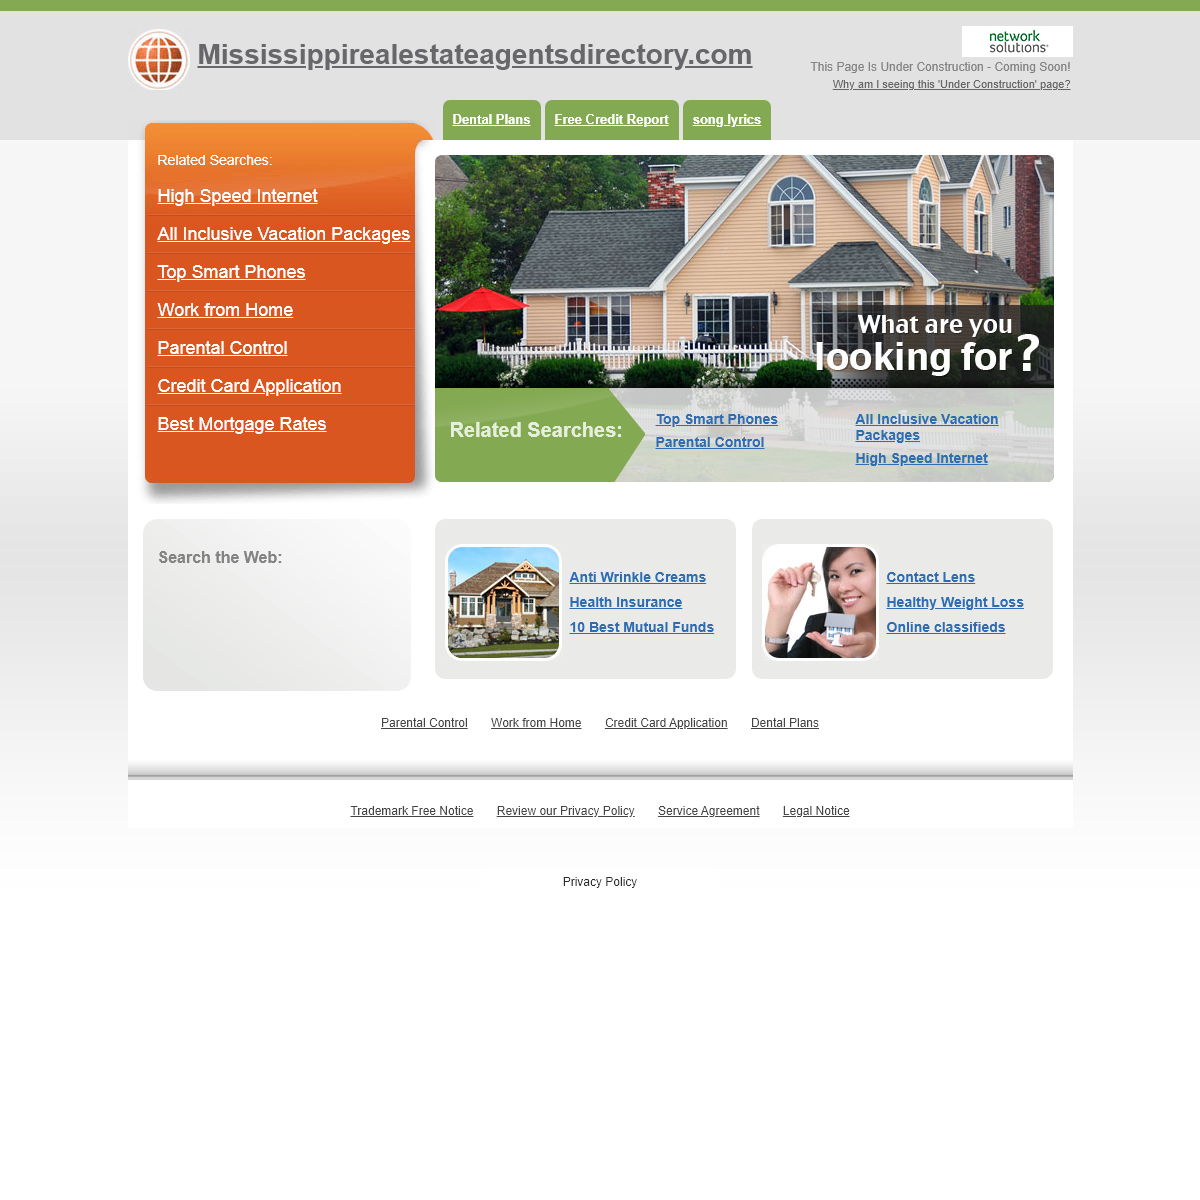 A complete backup of mississippirealestateagentsdirectory.com